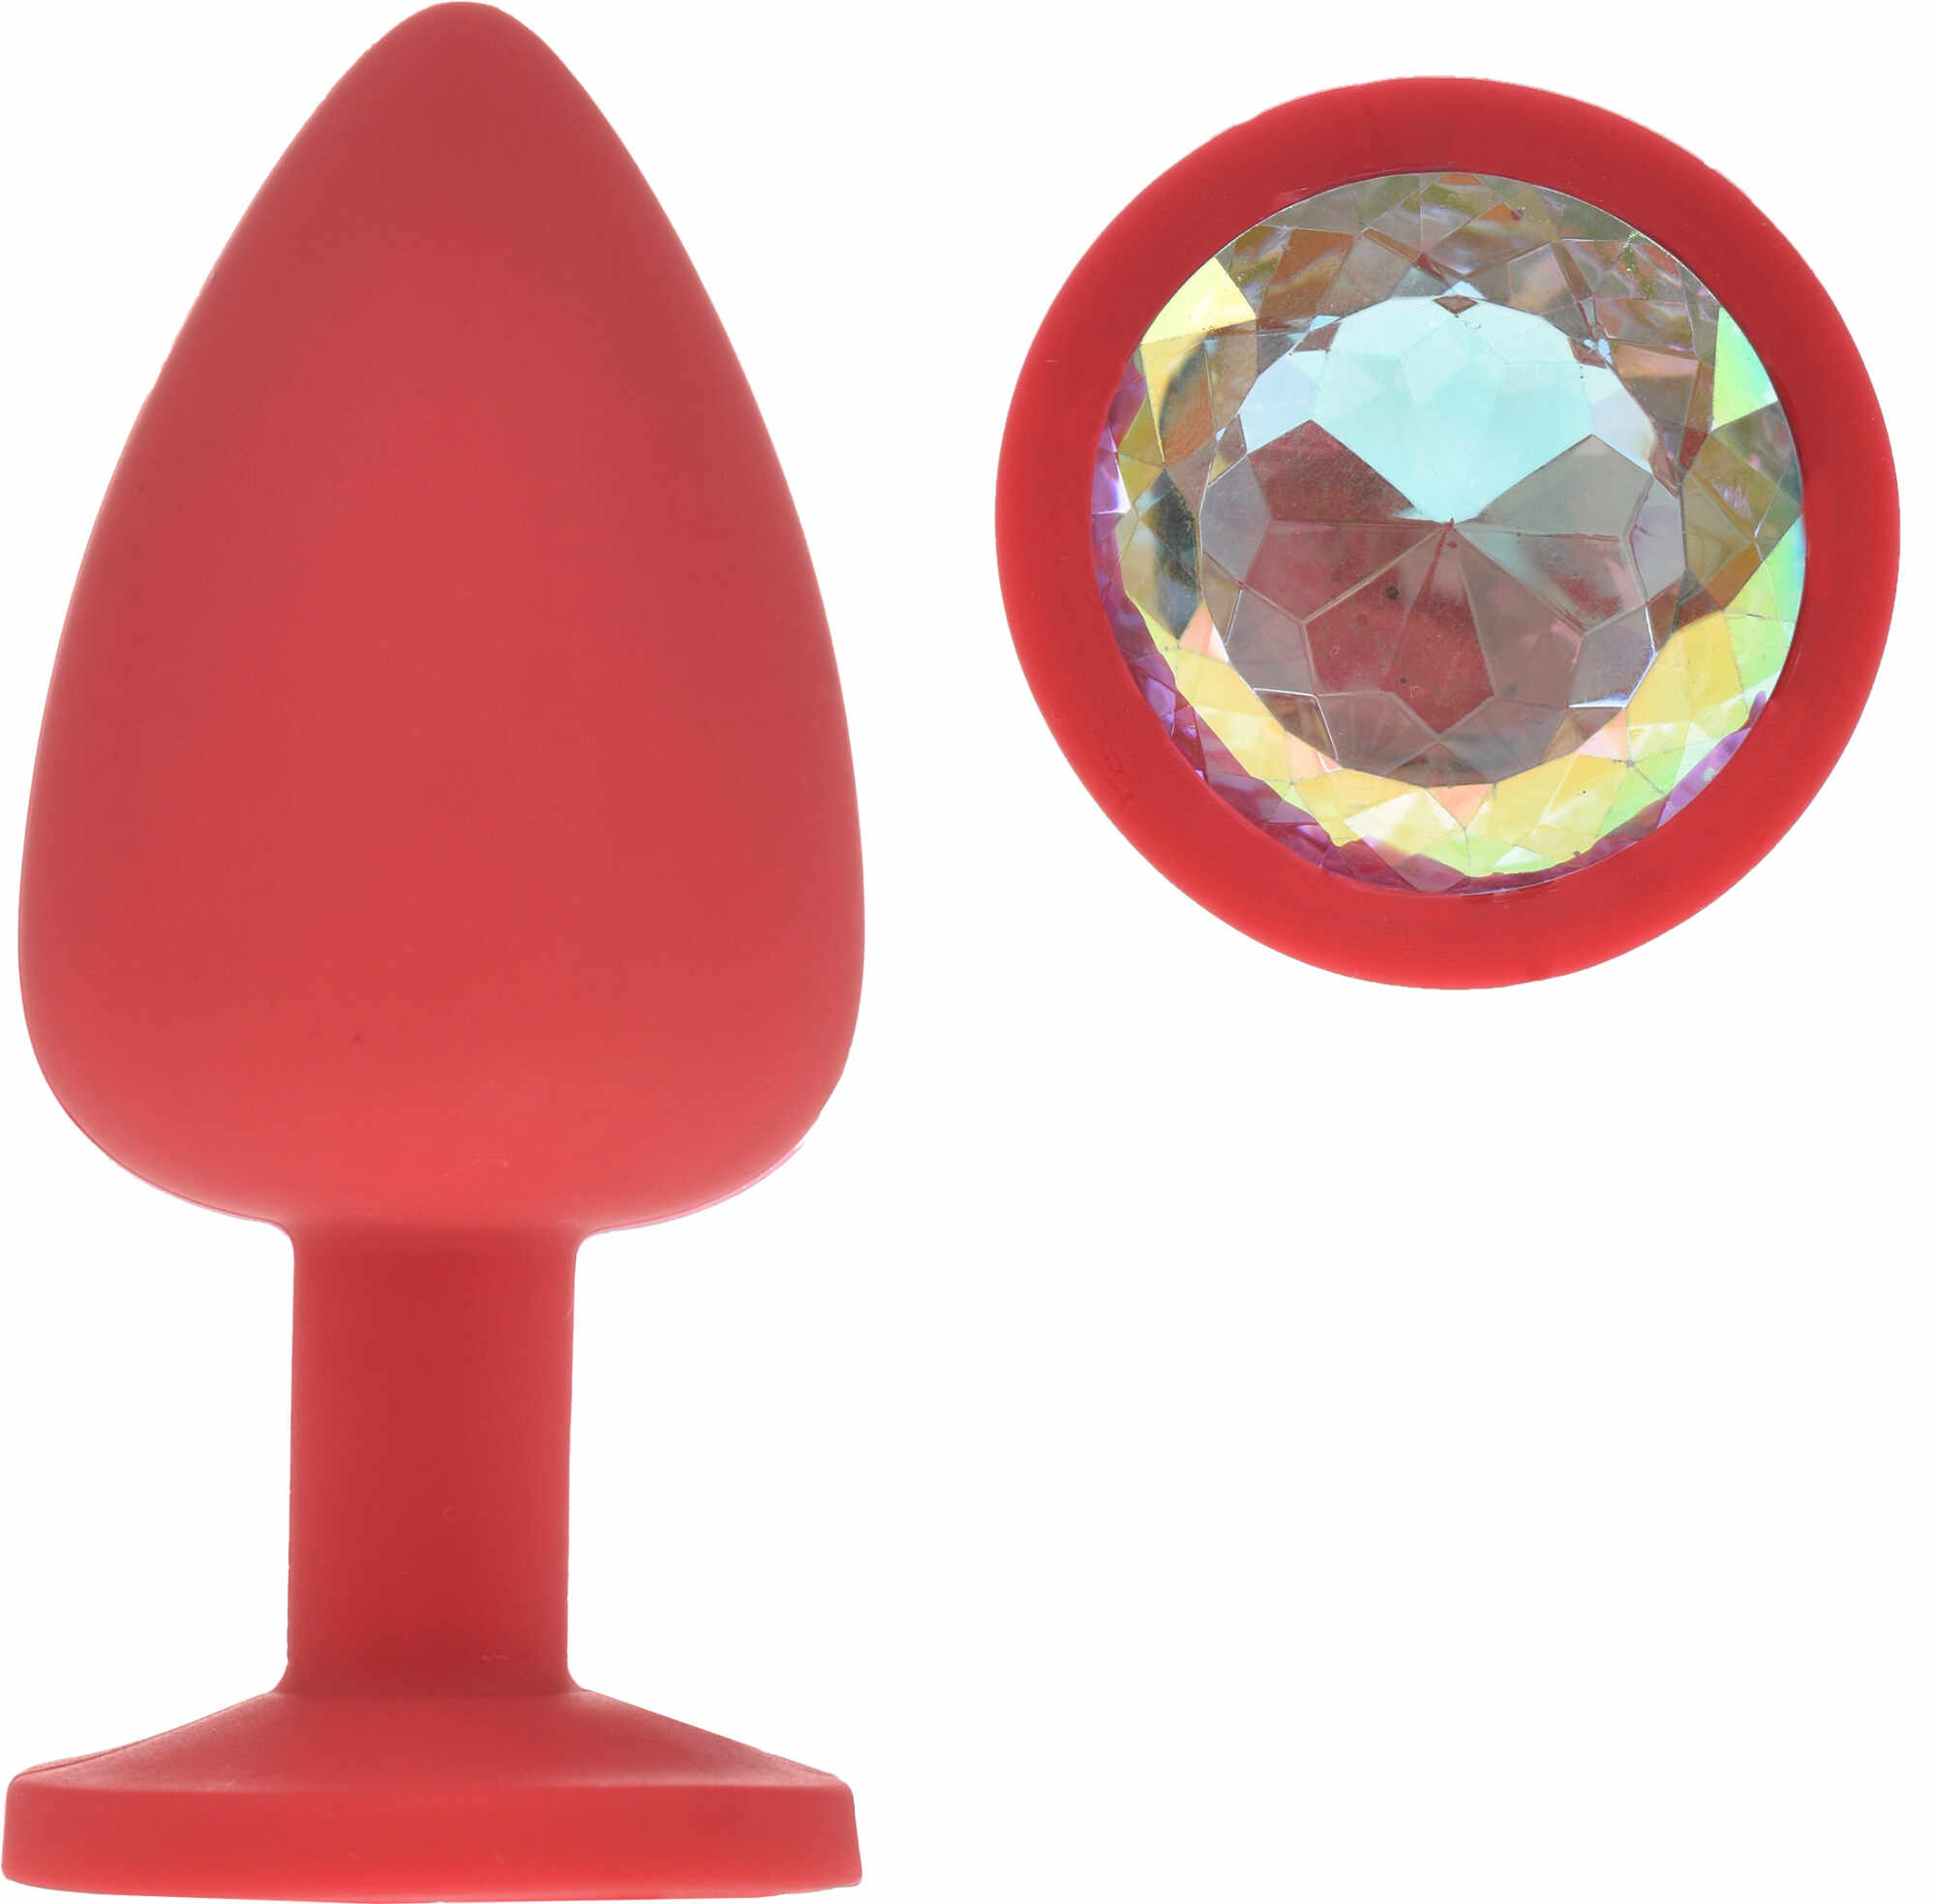 Dop Anal Silicone Buttplug Large Rosu/Iridescent Guilty Toys